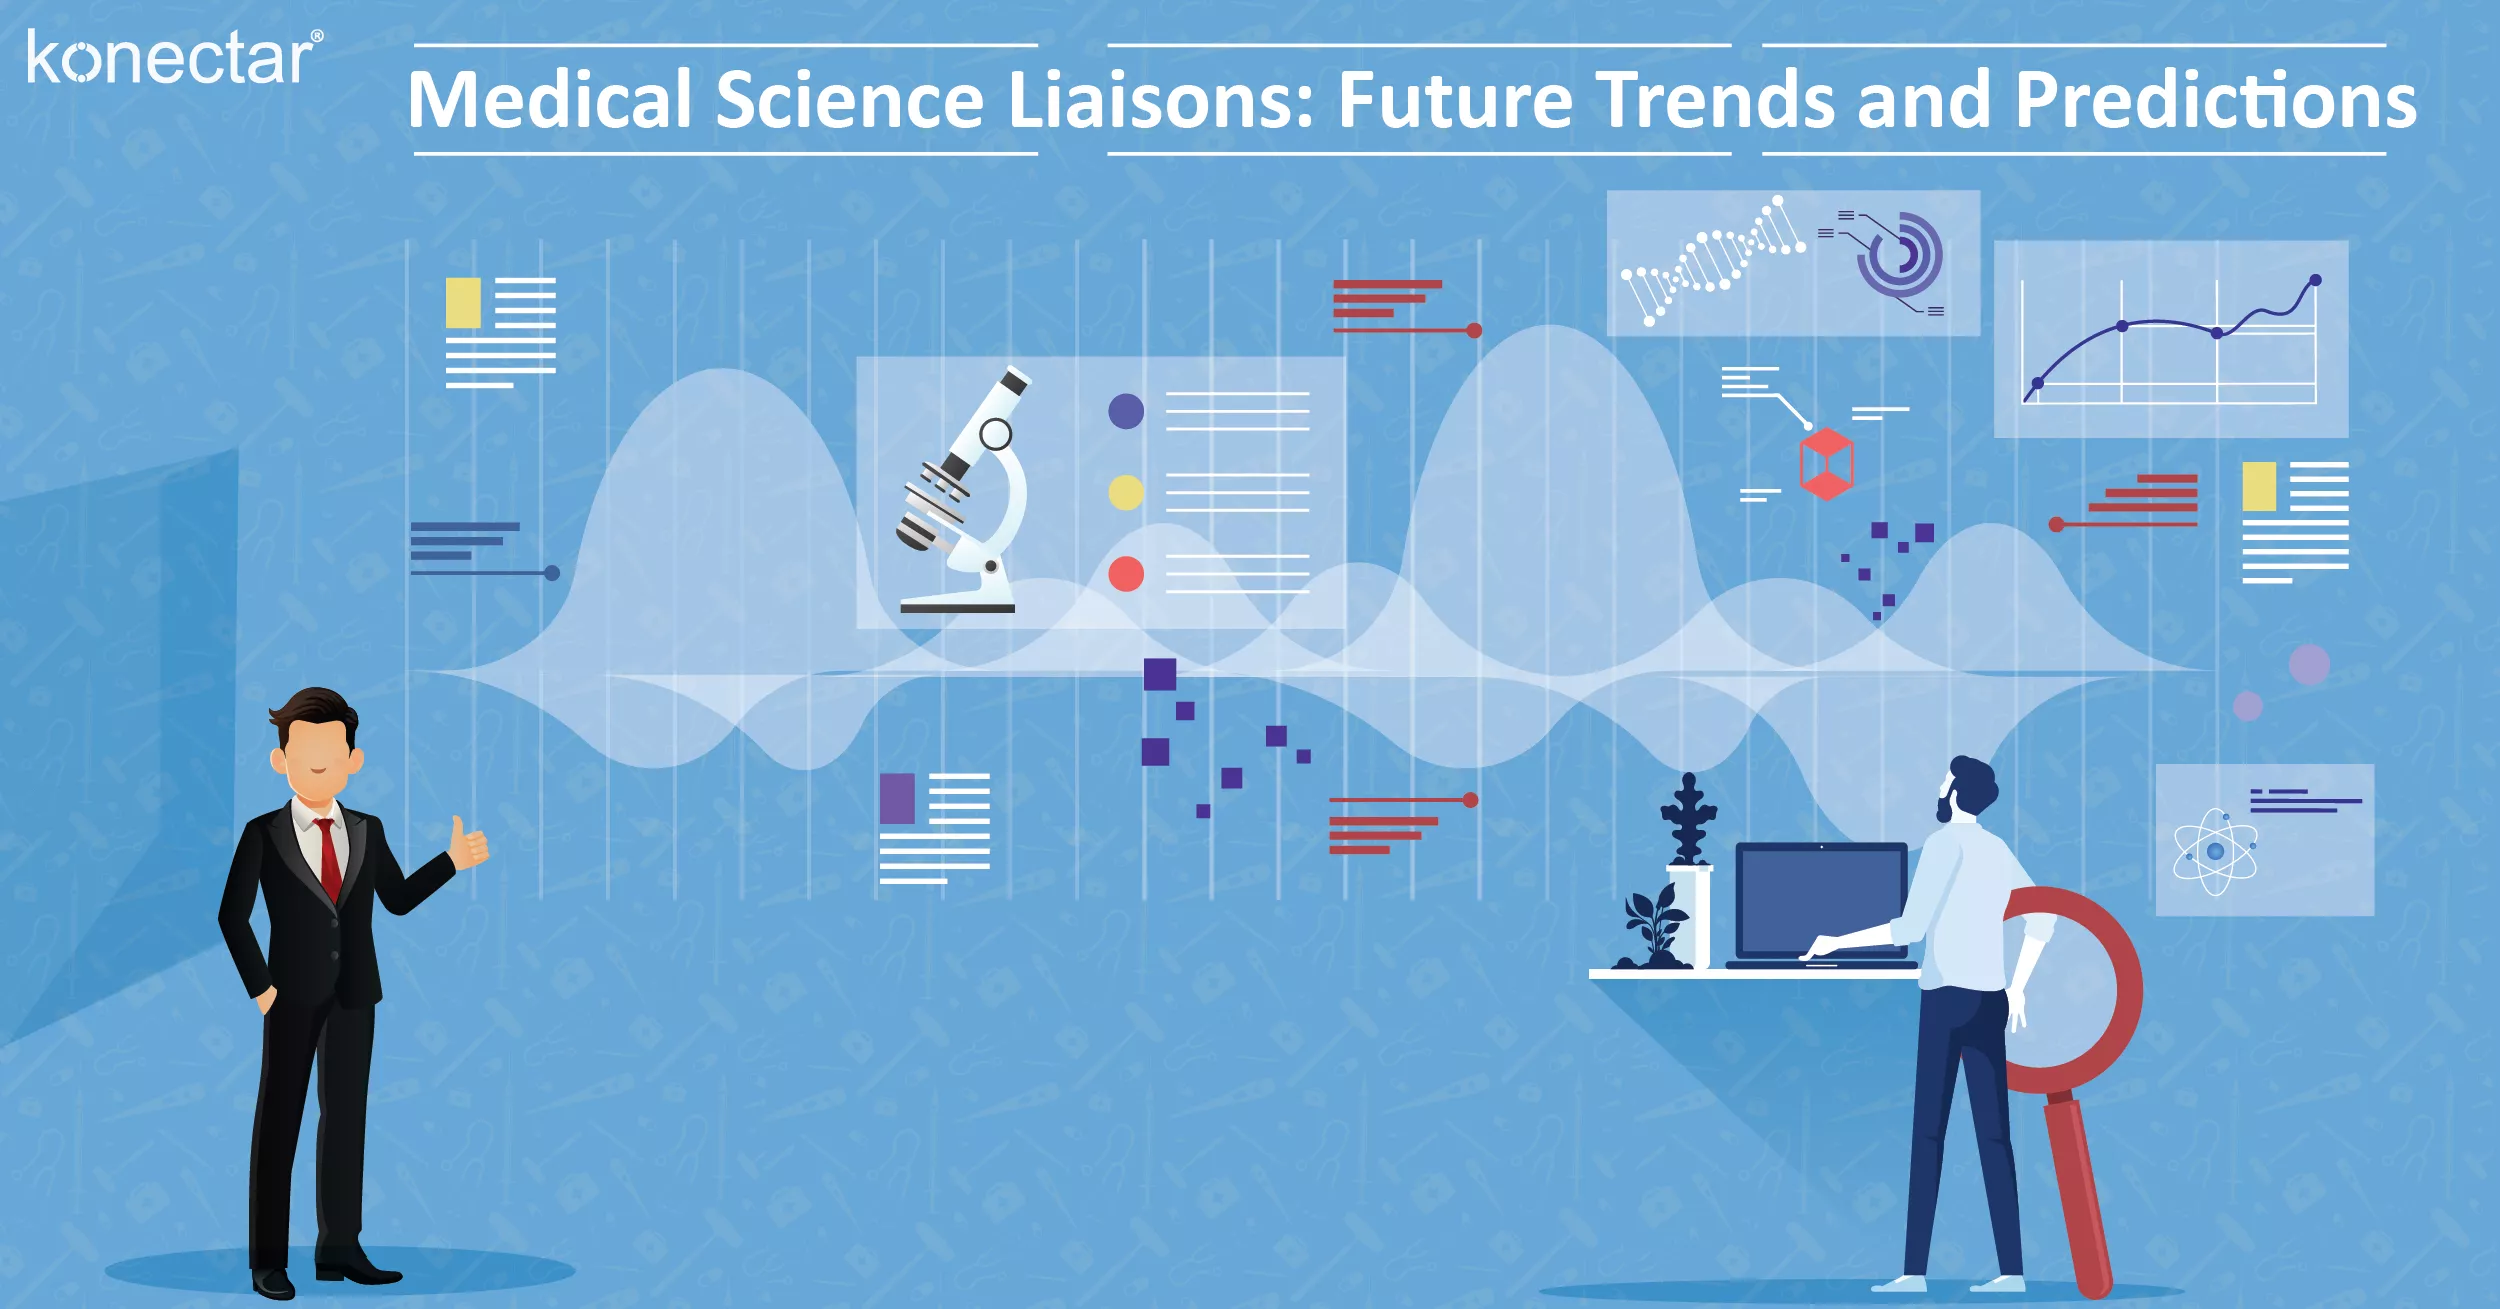 Medical Science Liaisons: Future Trends and Predictions